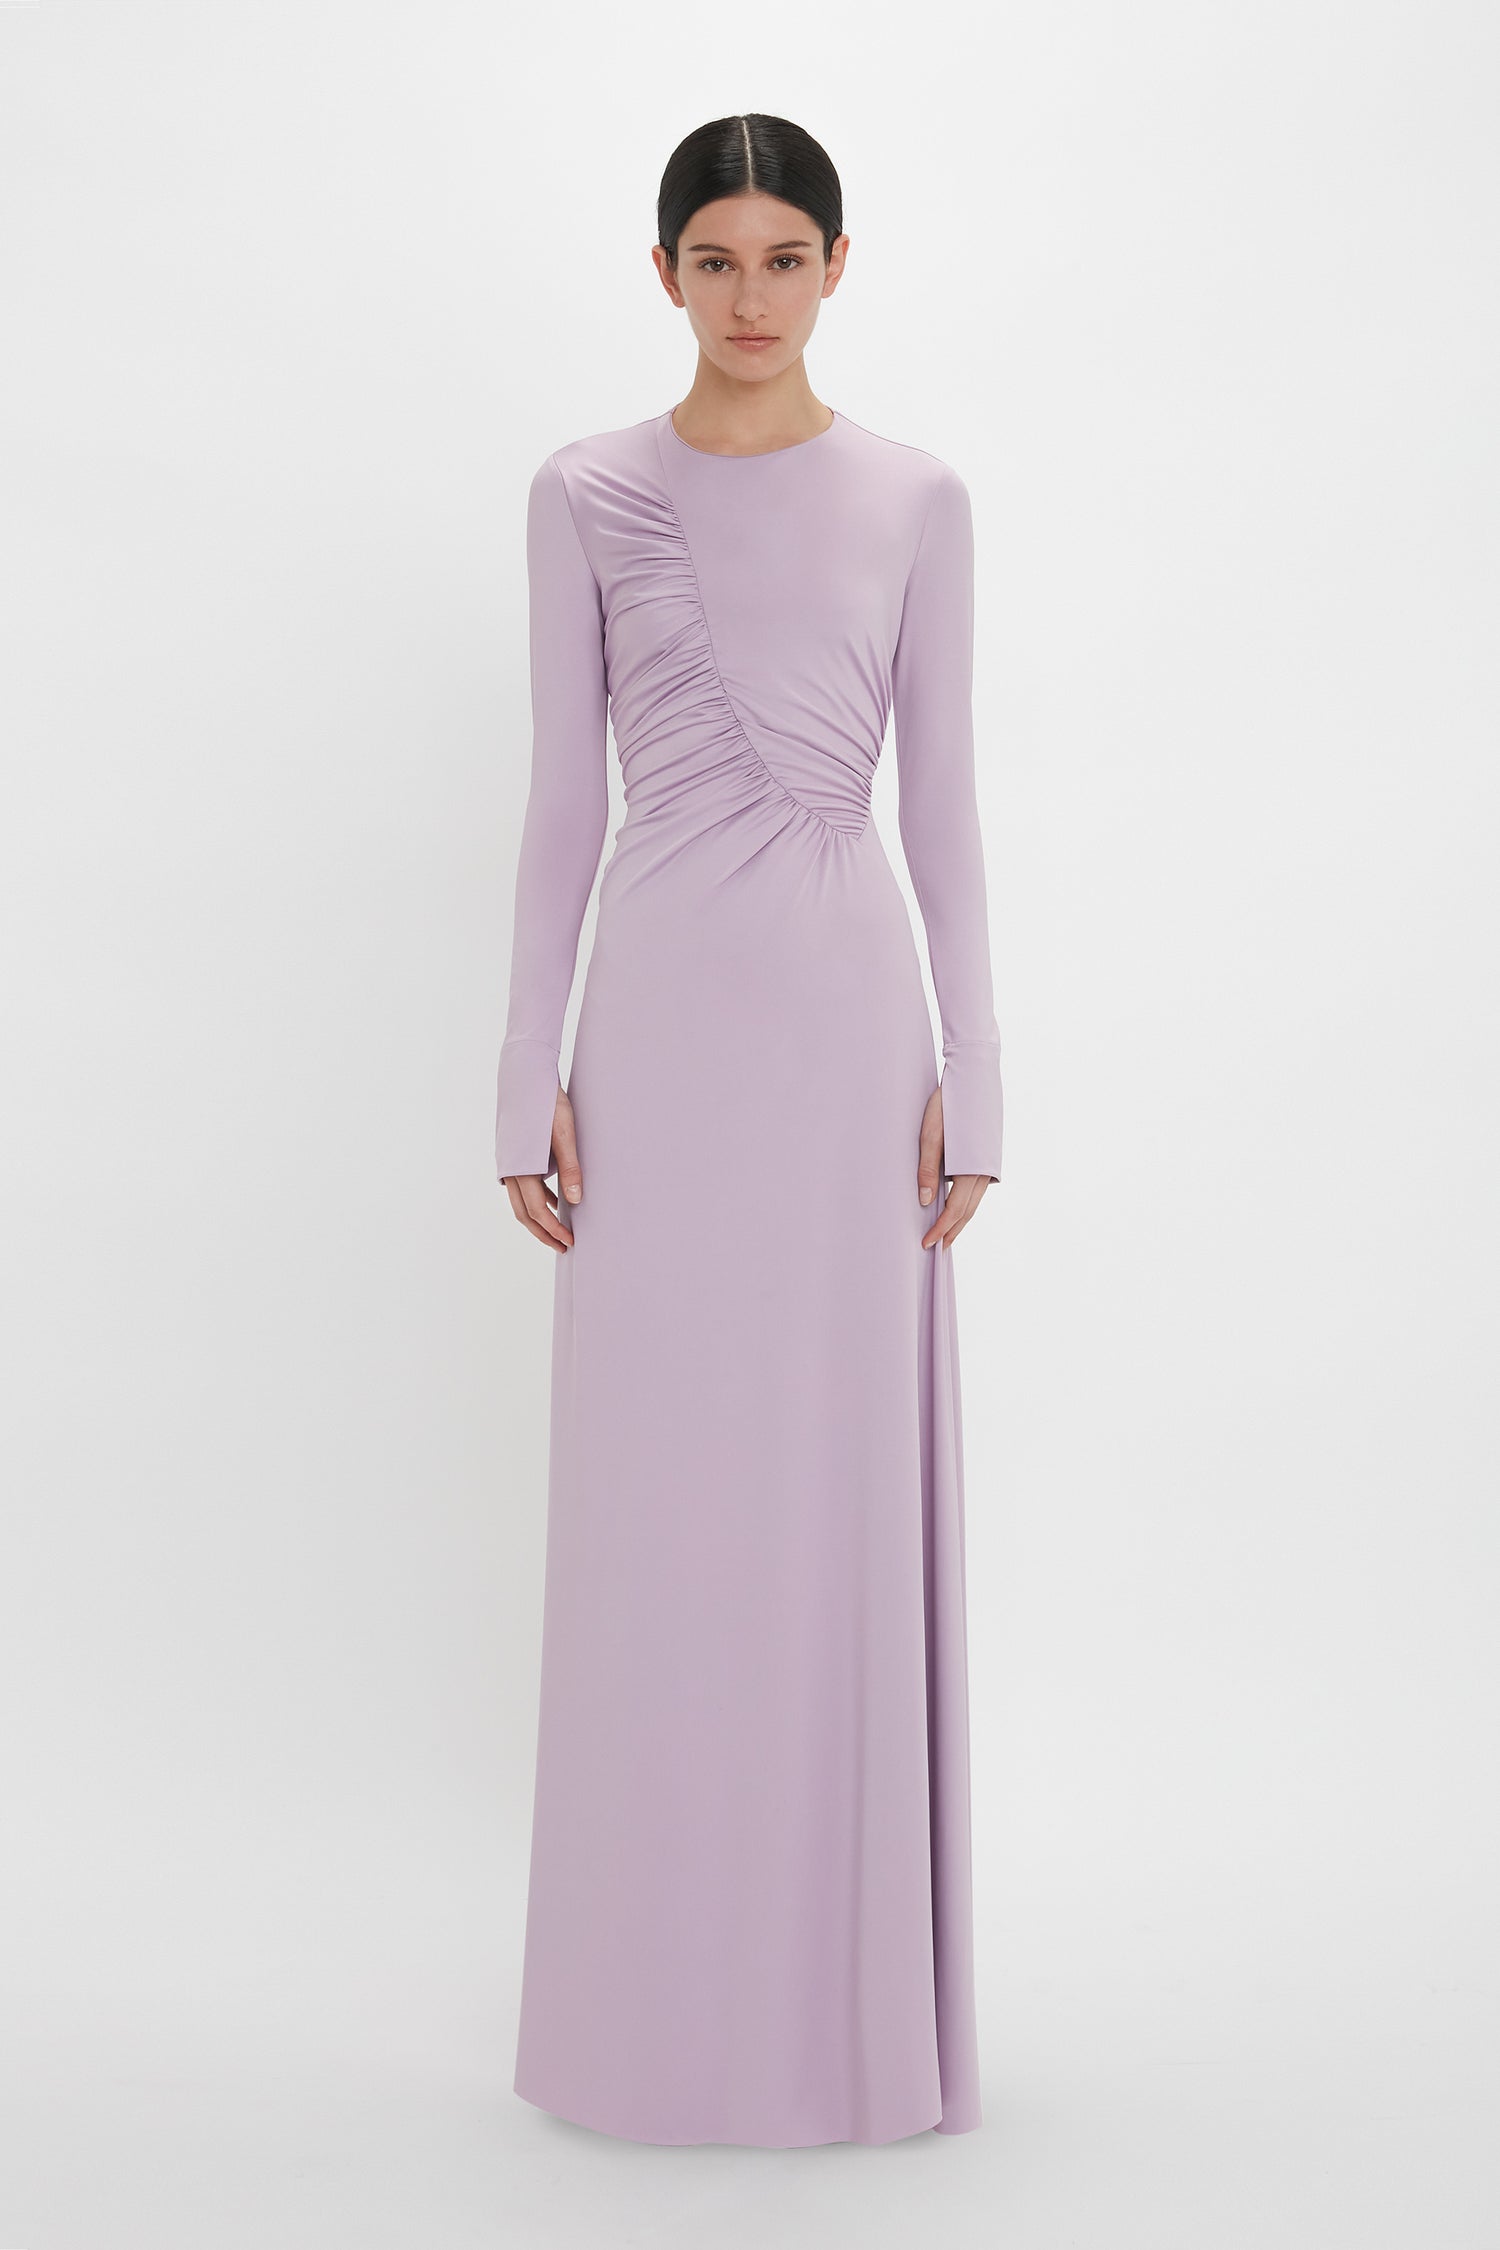 A person stands wearing a long-sleeved, floor-length light purple Ruched Detail Floor-Length Gown In Petunia by Victoria Beckham, crafted from stretch jersey fabric for understated glamour. The gathered detail on the right side adds a touch of elegance against the plain white background.